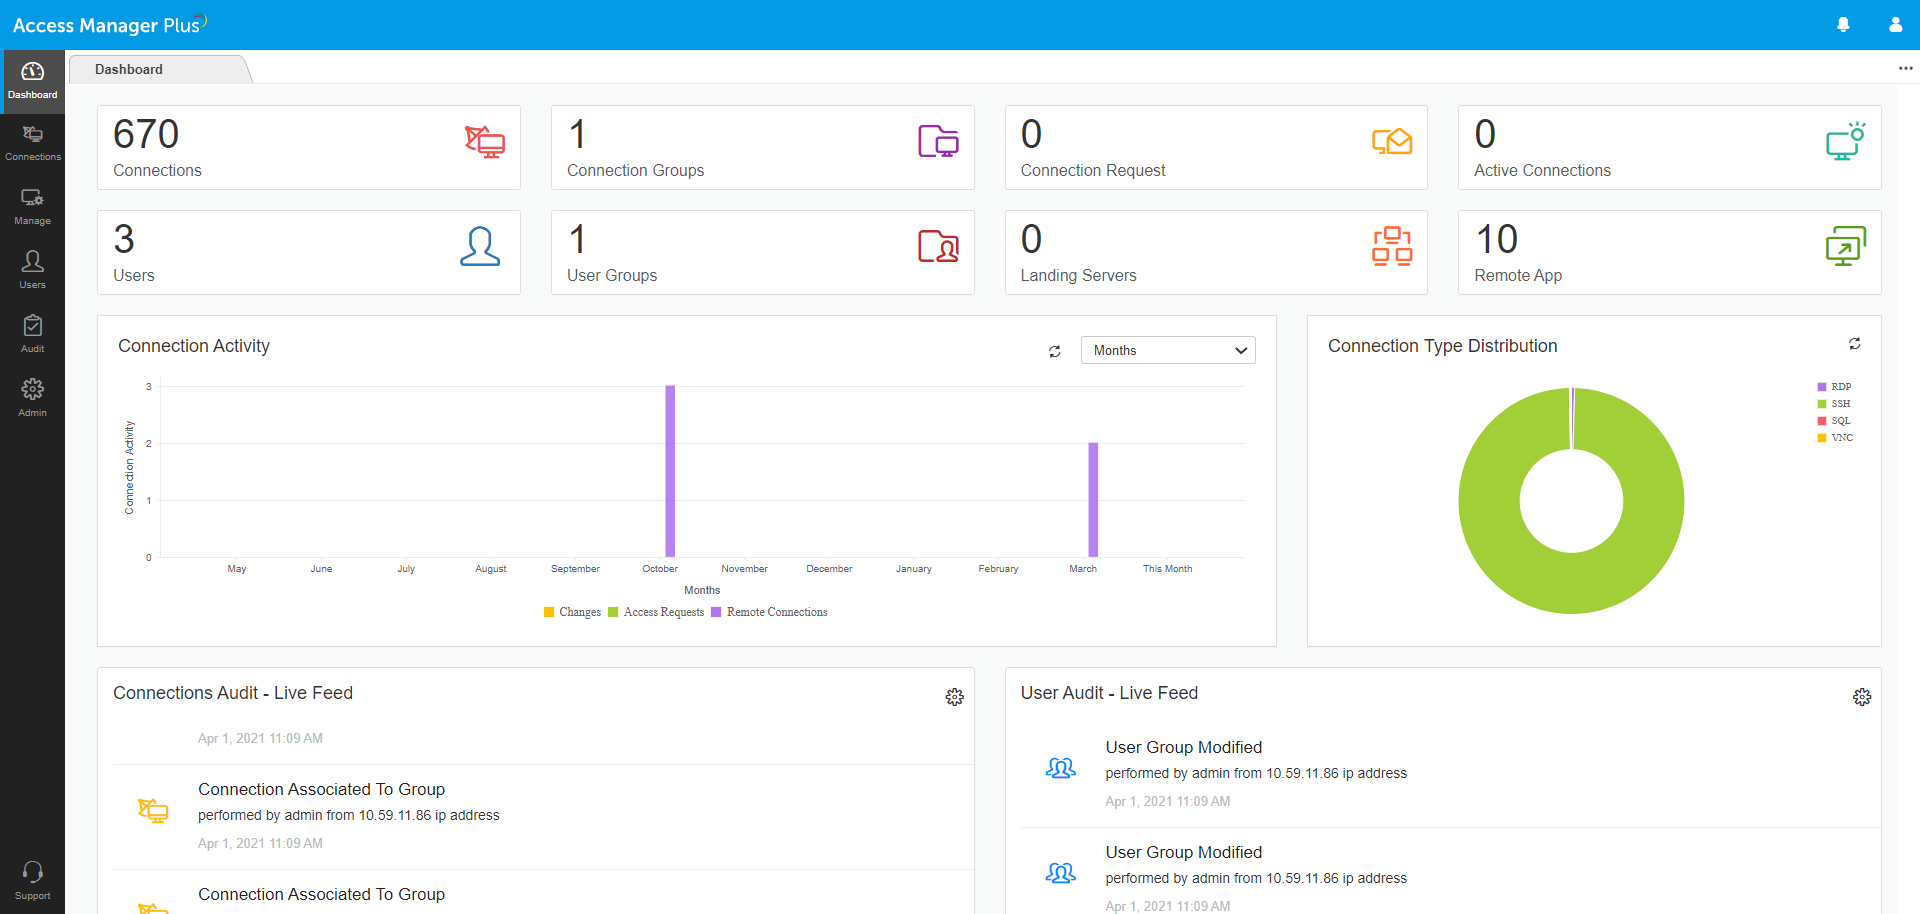 Centralized management dashboard in Access Manager Plus